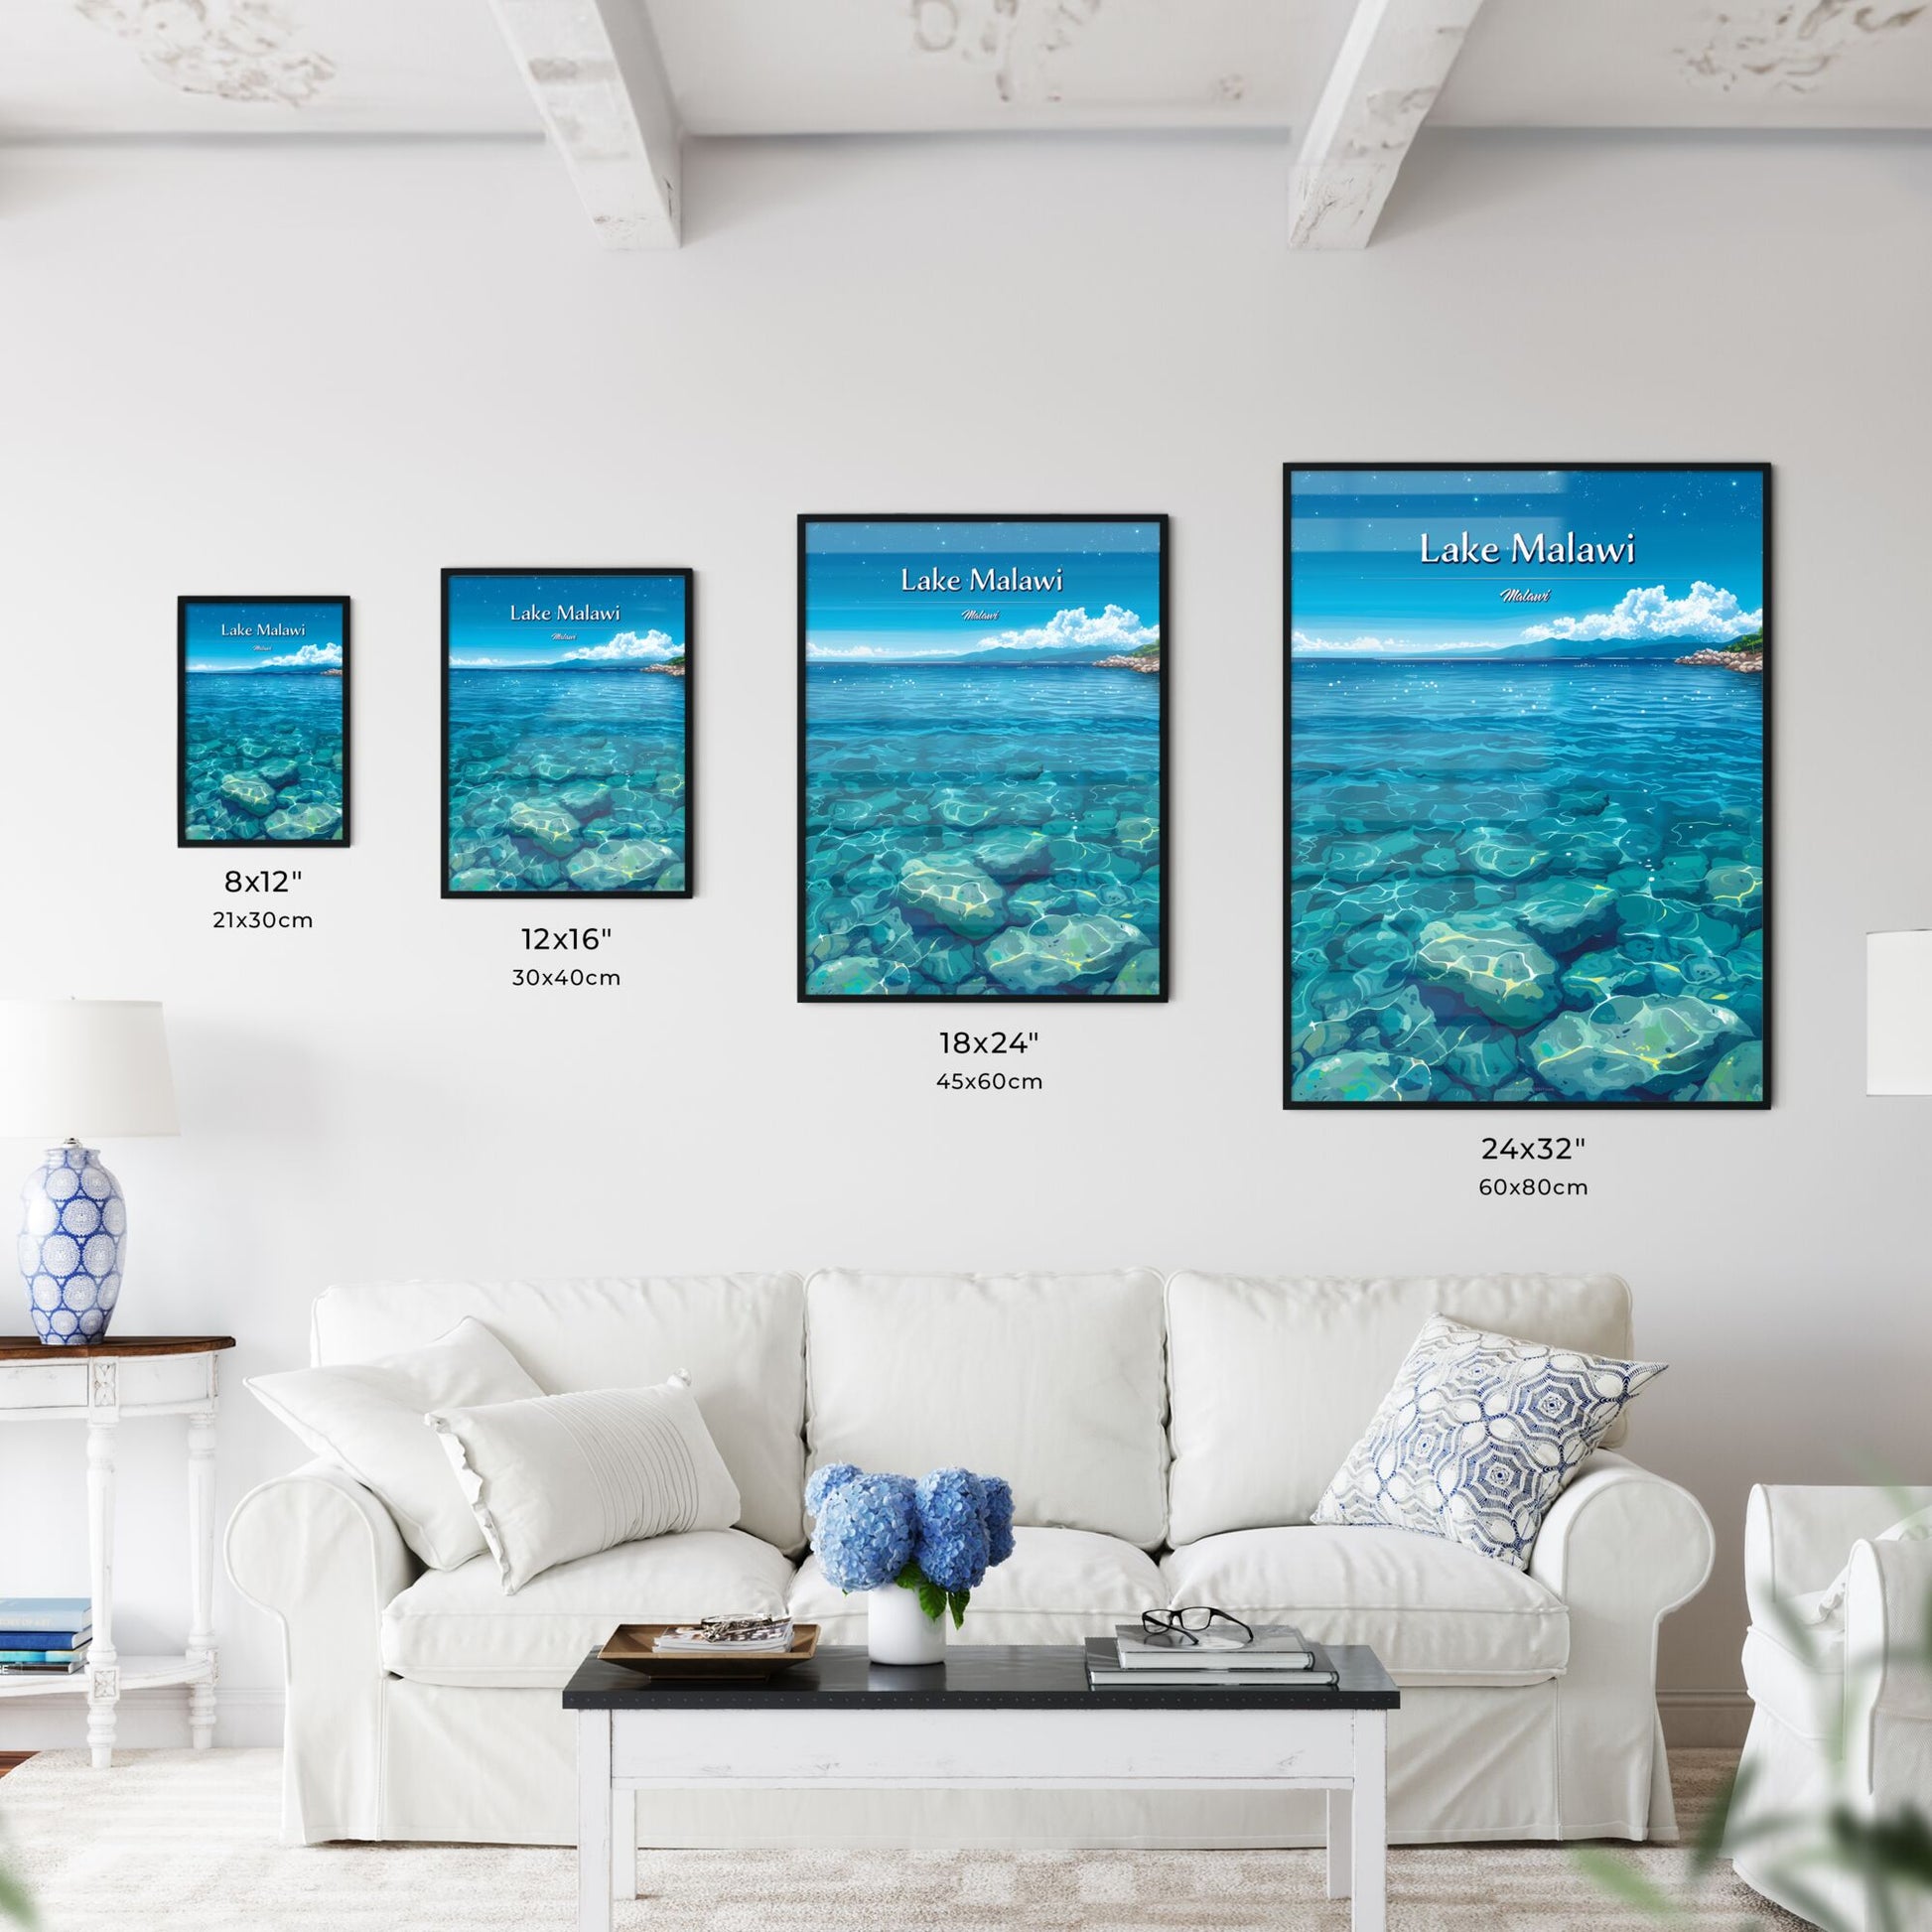 Lake Malawi, Malawi - Art print of a blue water with rocks and a rocky shore Default Title